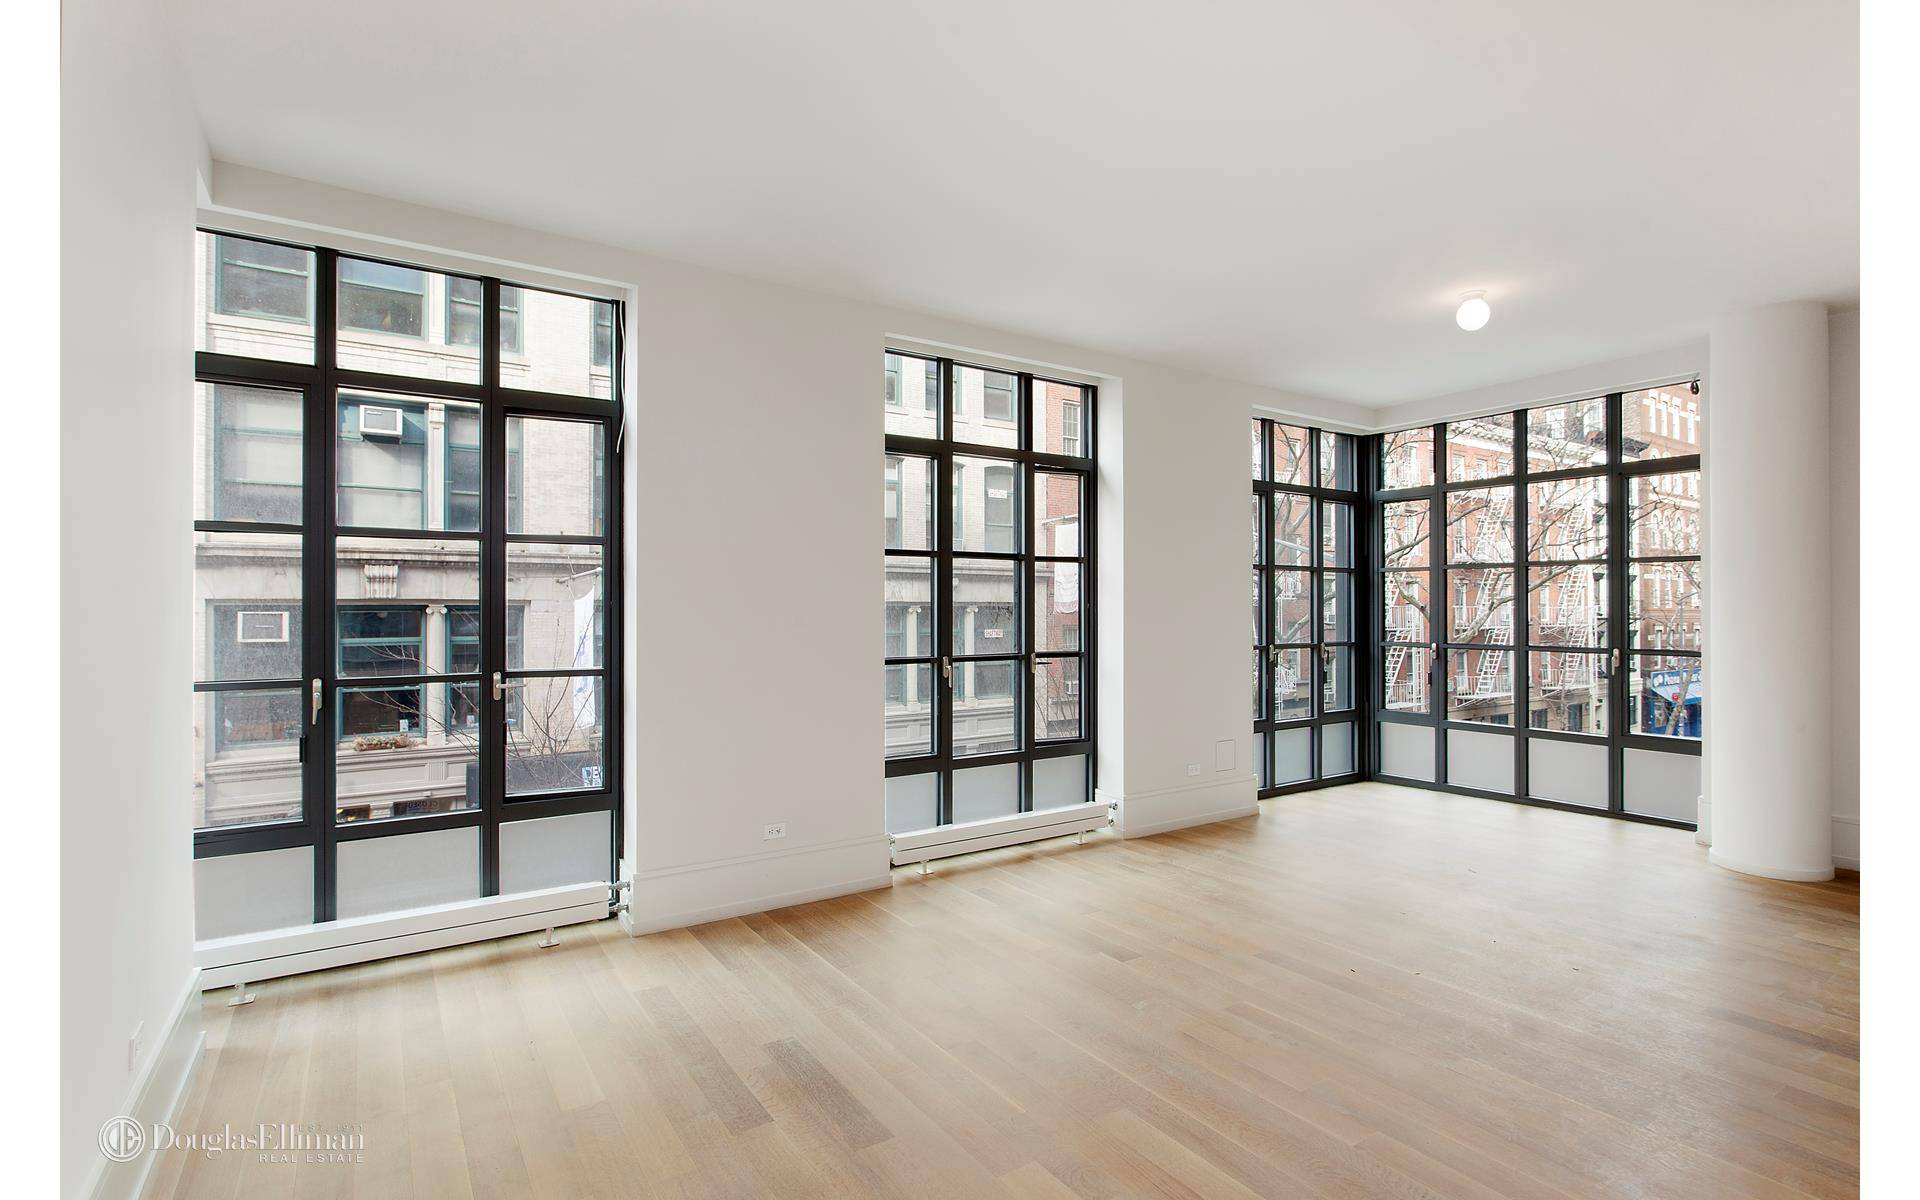 215 Sullivan Street Condominium is located in the heart of Greenwich Village, only steps away from Washington Square Park, the West Village, Soho and Noho and some of the city's ...